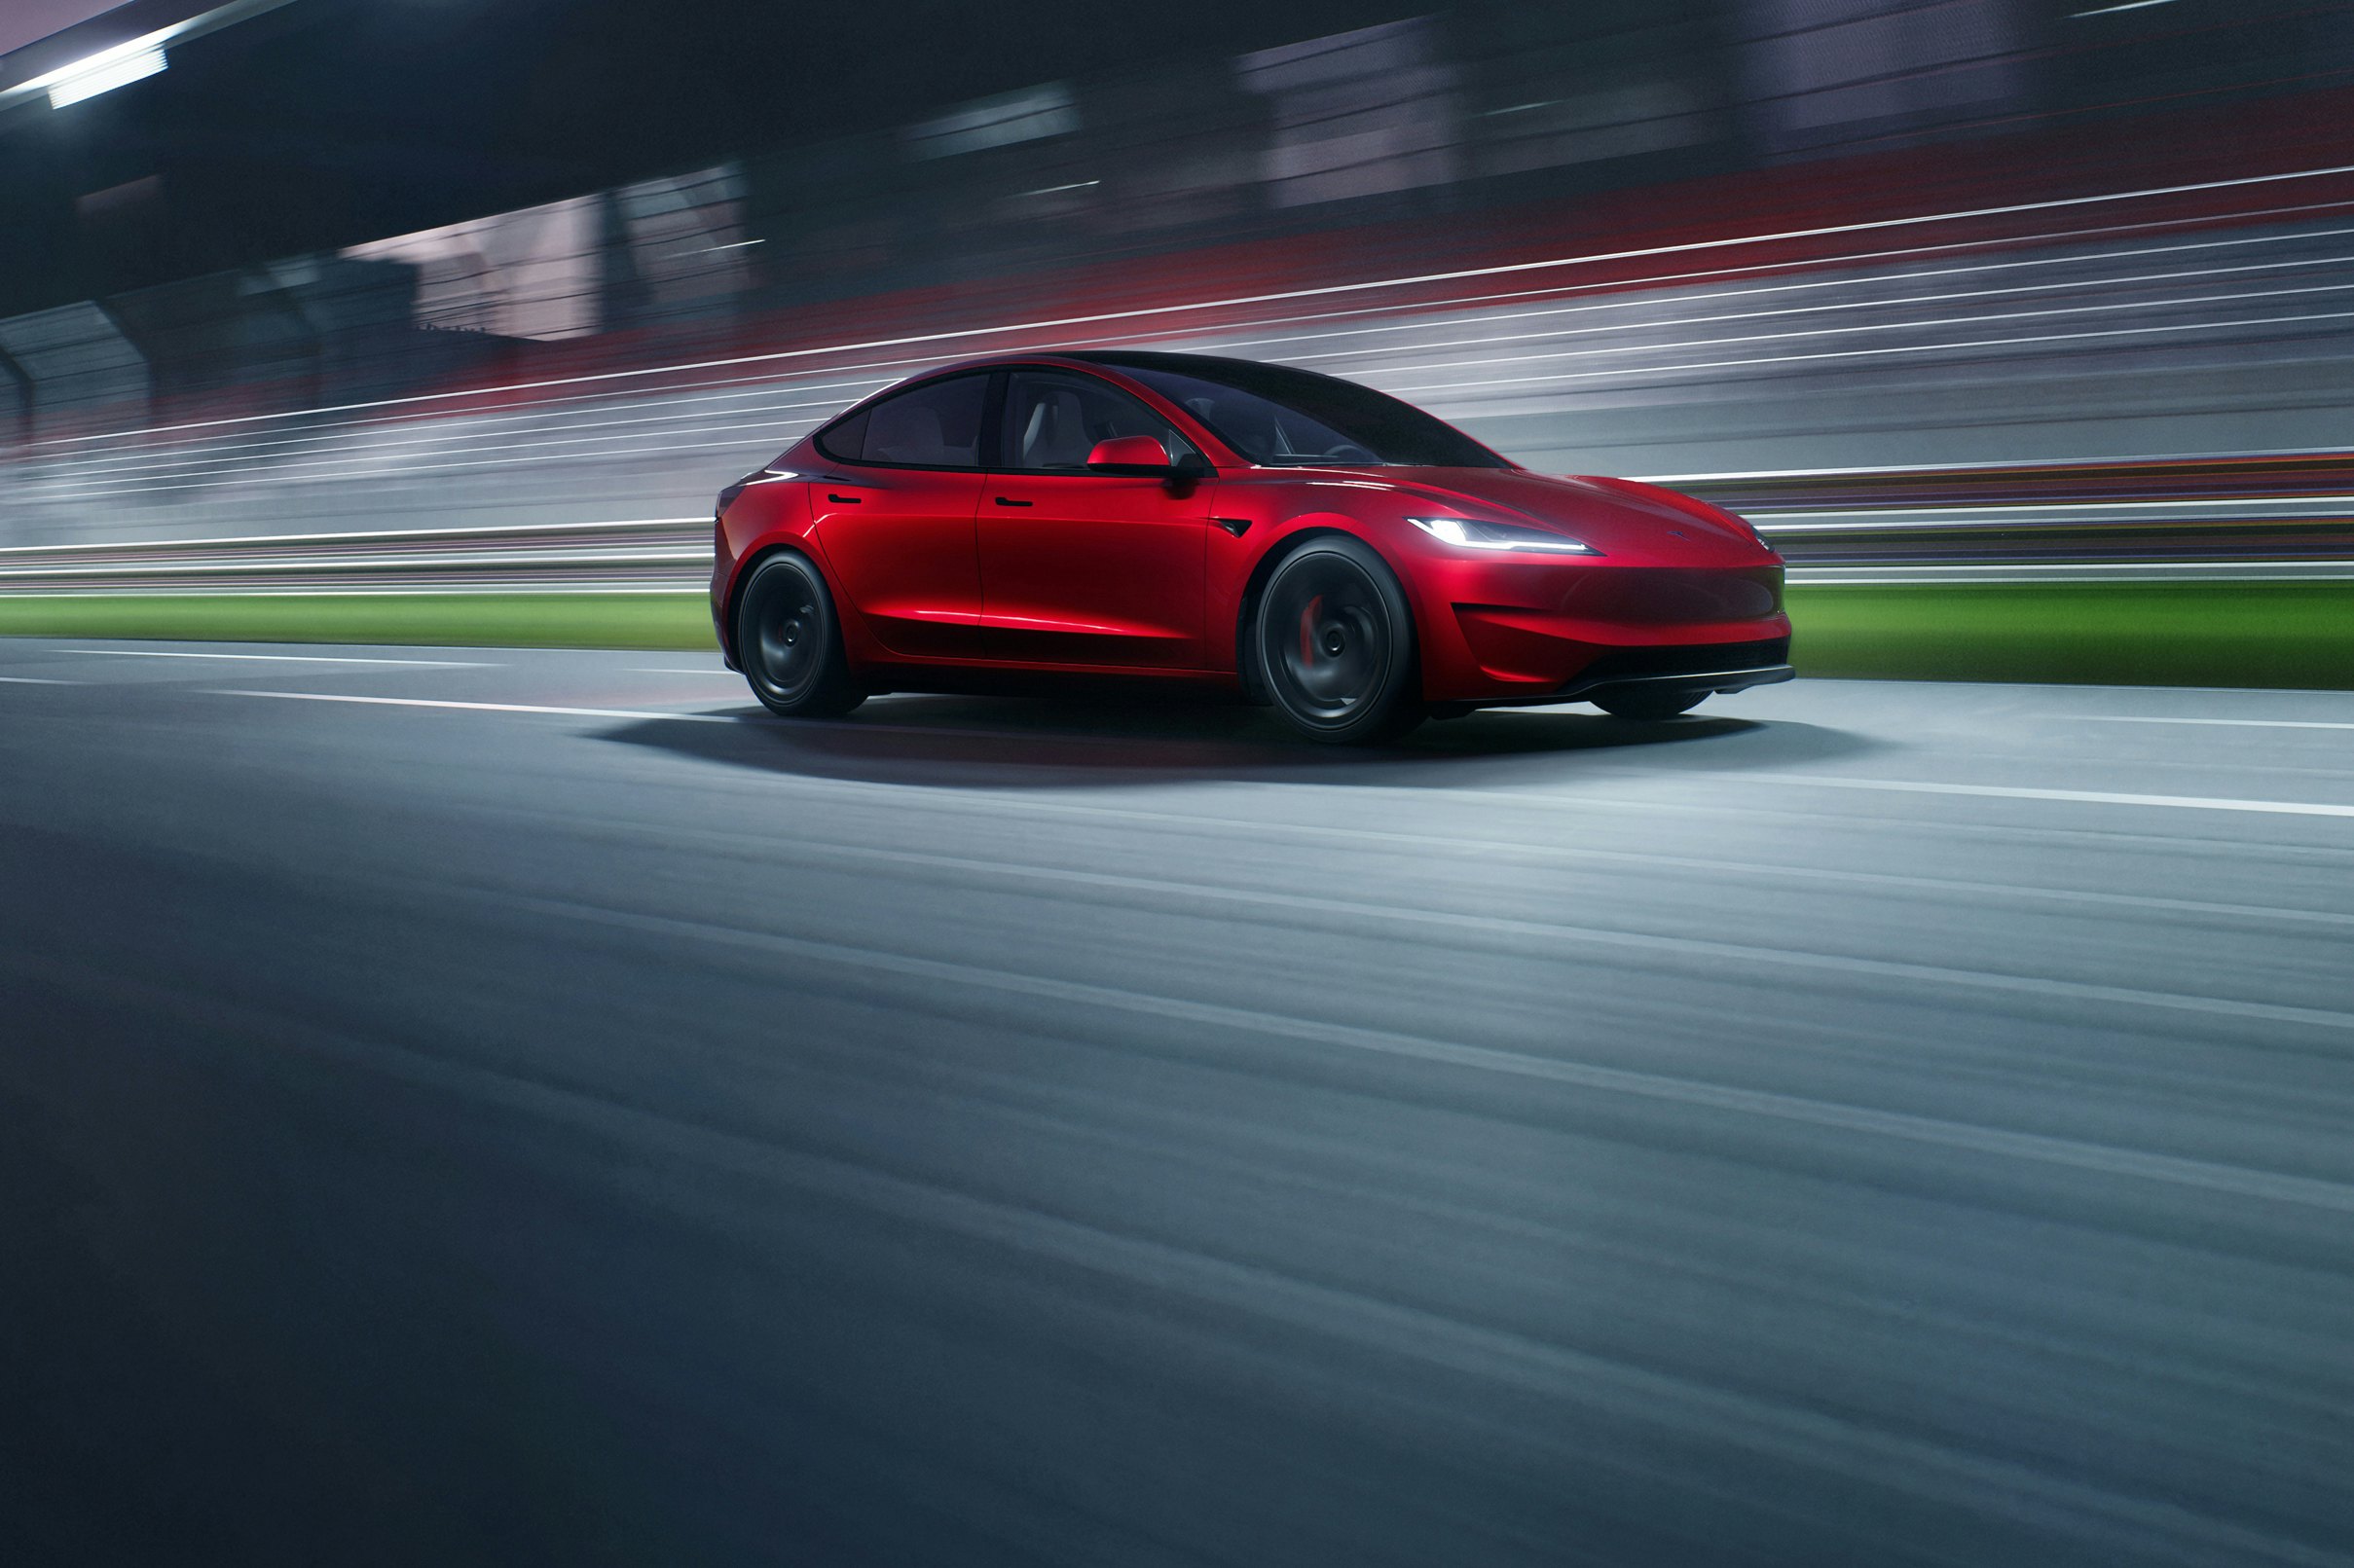 Tesla’s Souped-Up Model 3 Gives You Near Porsche-Level Performance for a Bargain